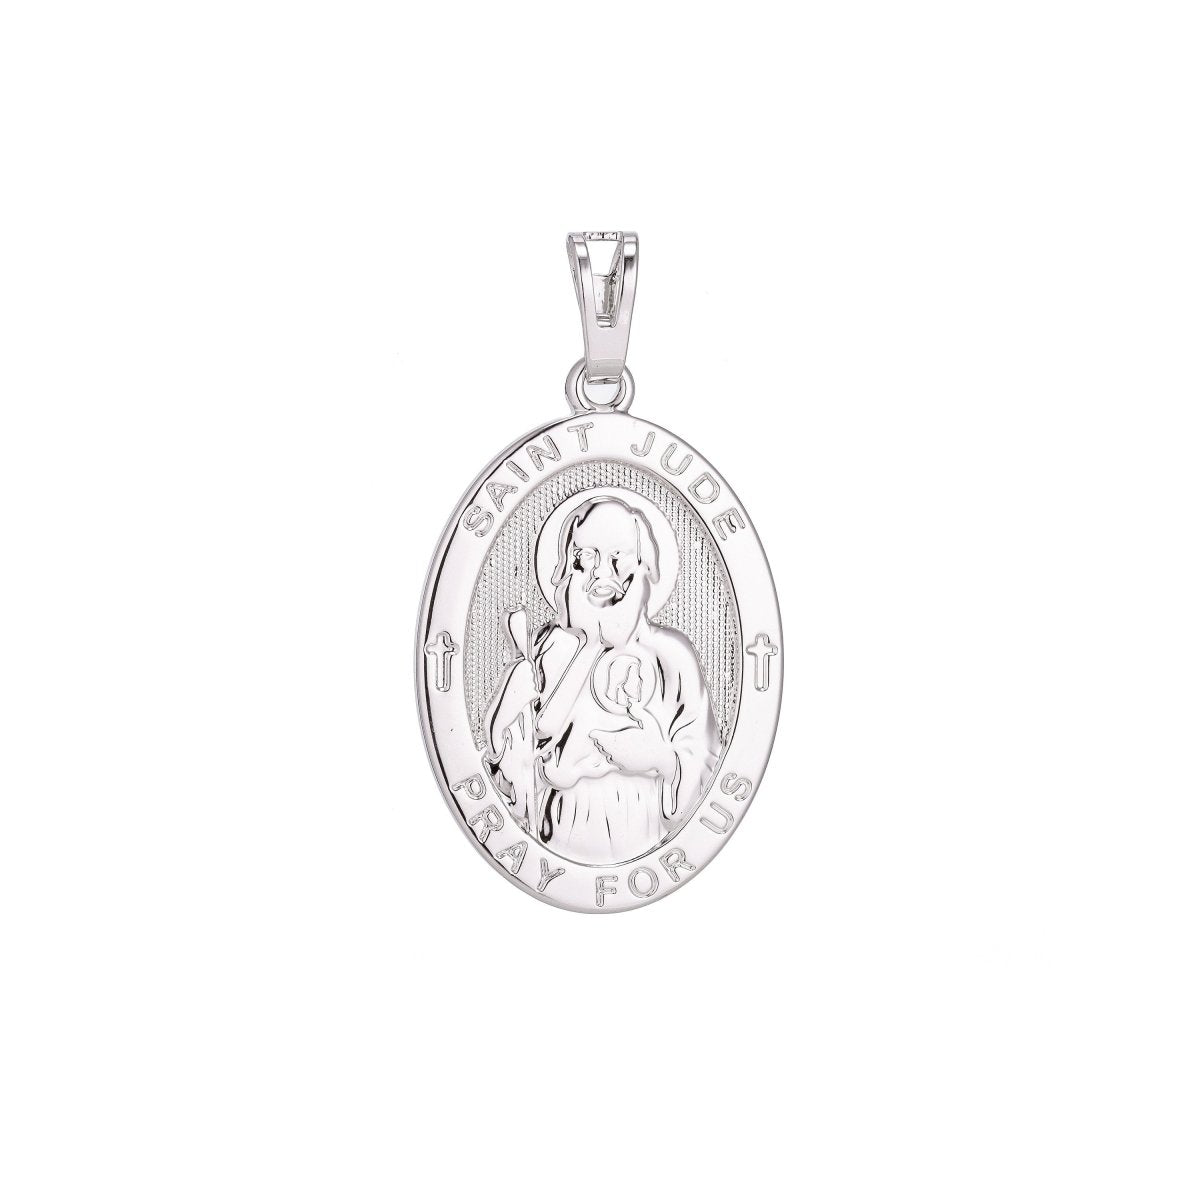 18K Gold Filled / White Gold Saint Jude Medal Pendant for Hope & Impossible Cause Religious Amulet charm for Necklace Jewelry Making H-282 - DLUXCA